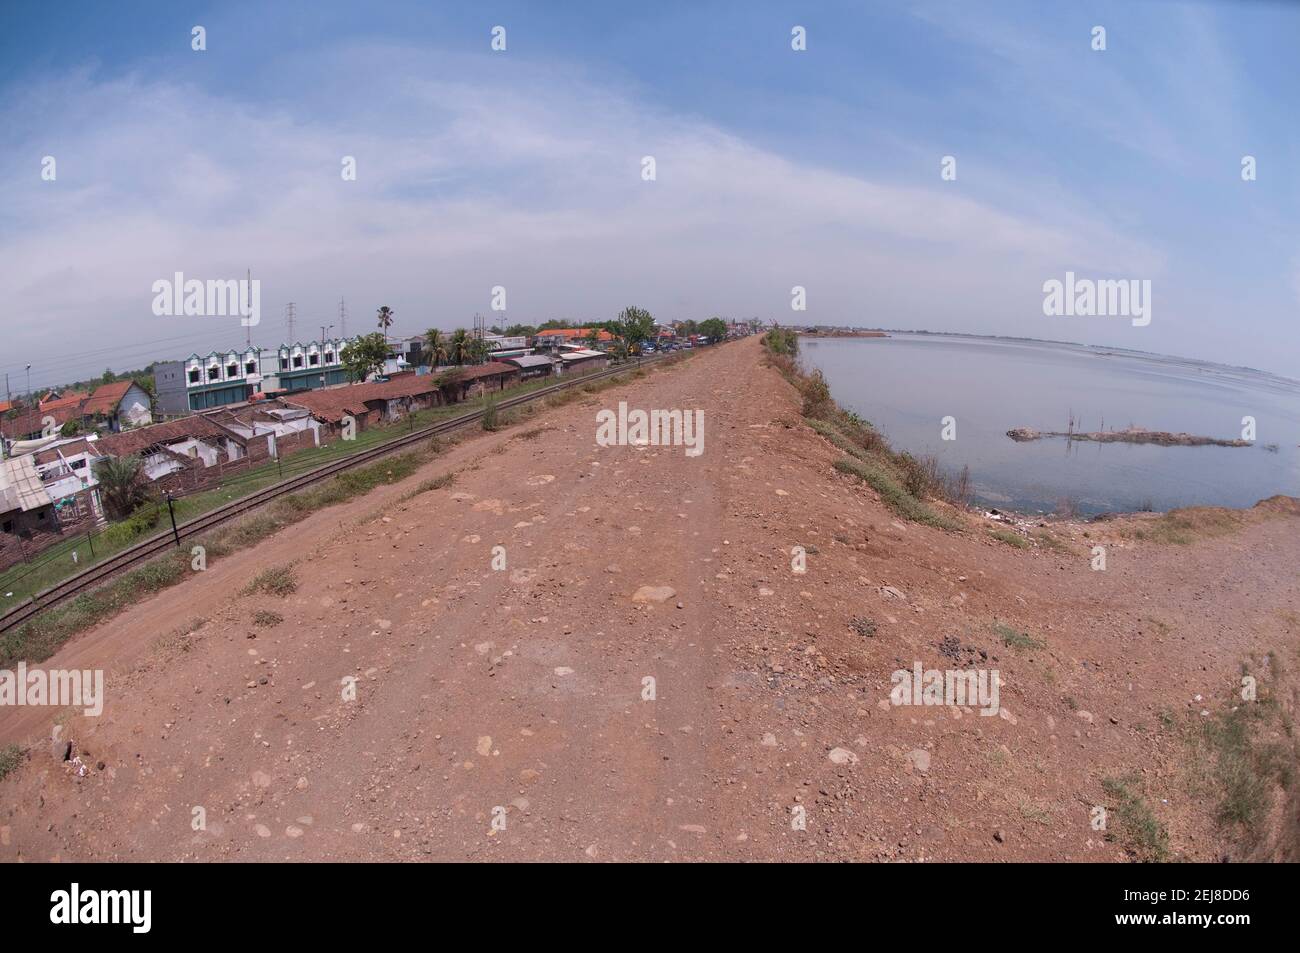 Levee seperating village with mud lake environmental disaster which developed after drilling incident, Porong Sidoarjo, near Surabaya, East Java, Indo Stock Photo